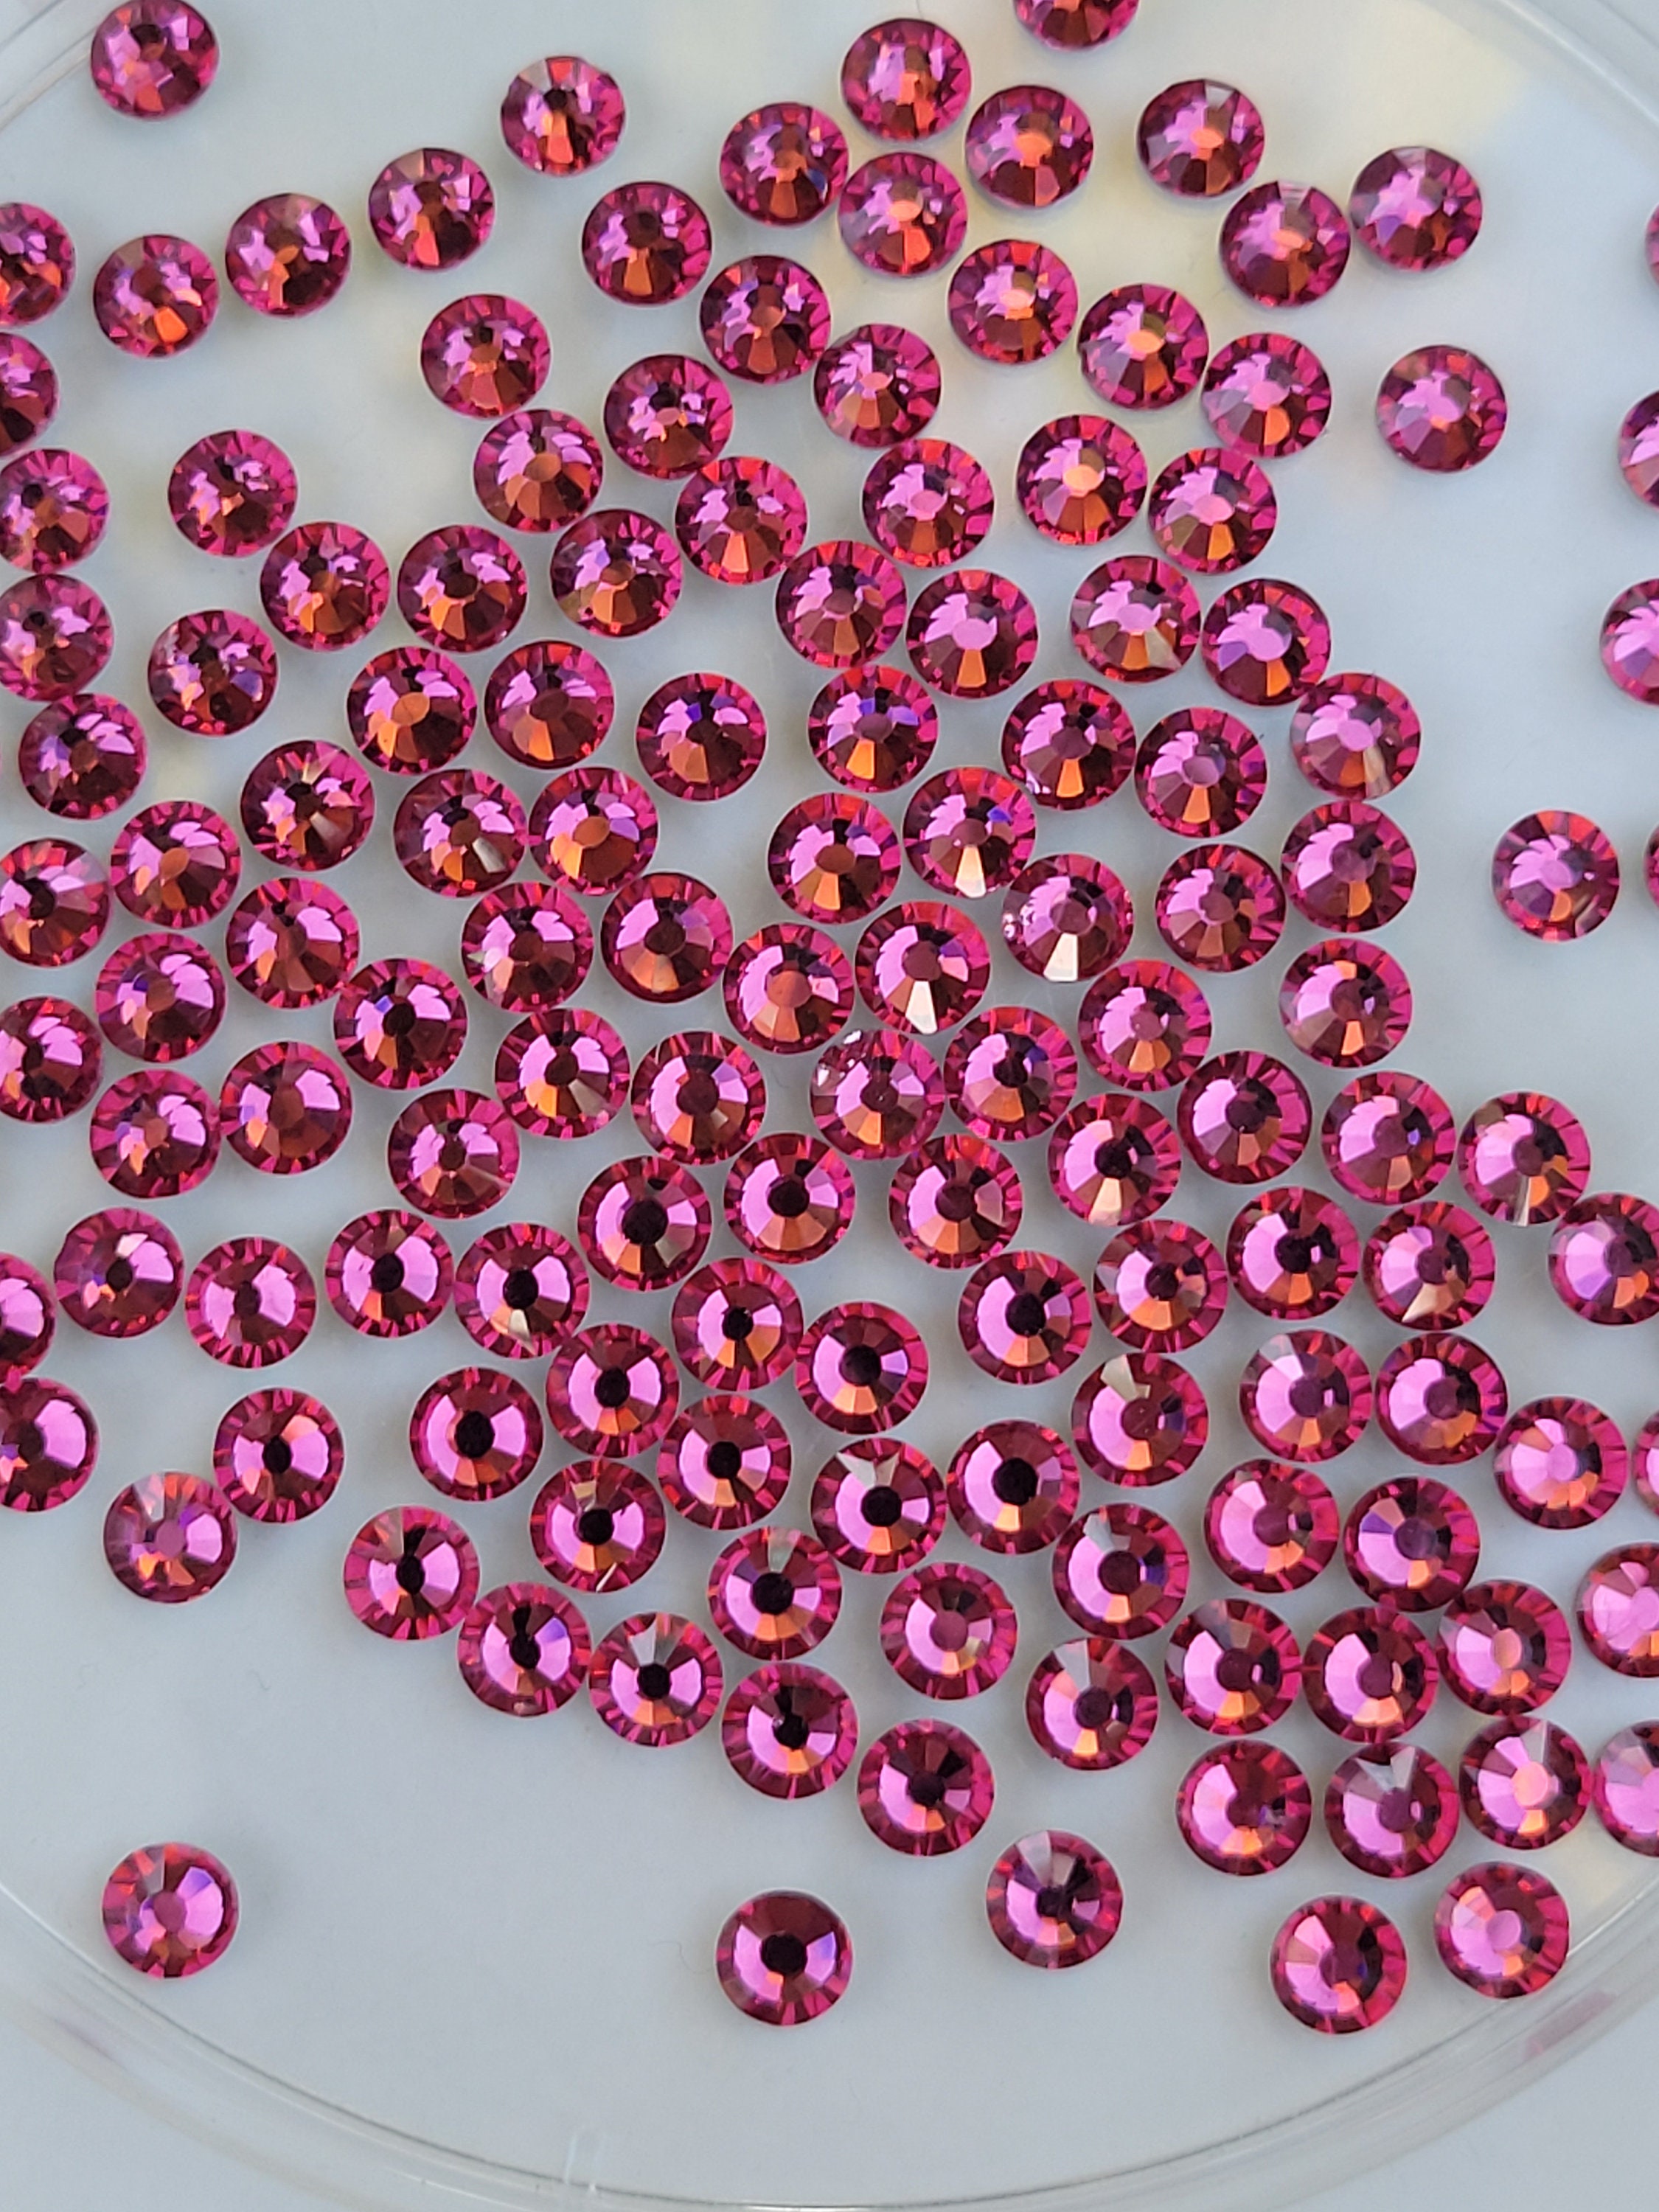 Size 16 SS 3.8mm-4mm Austrian Crystal Flat Back Crystal Rhinestone / Sold  by the Gross 144 Pieces / Dance Costume Rhinestone Decorations 